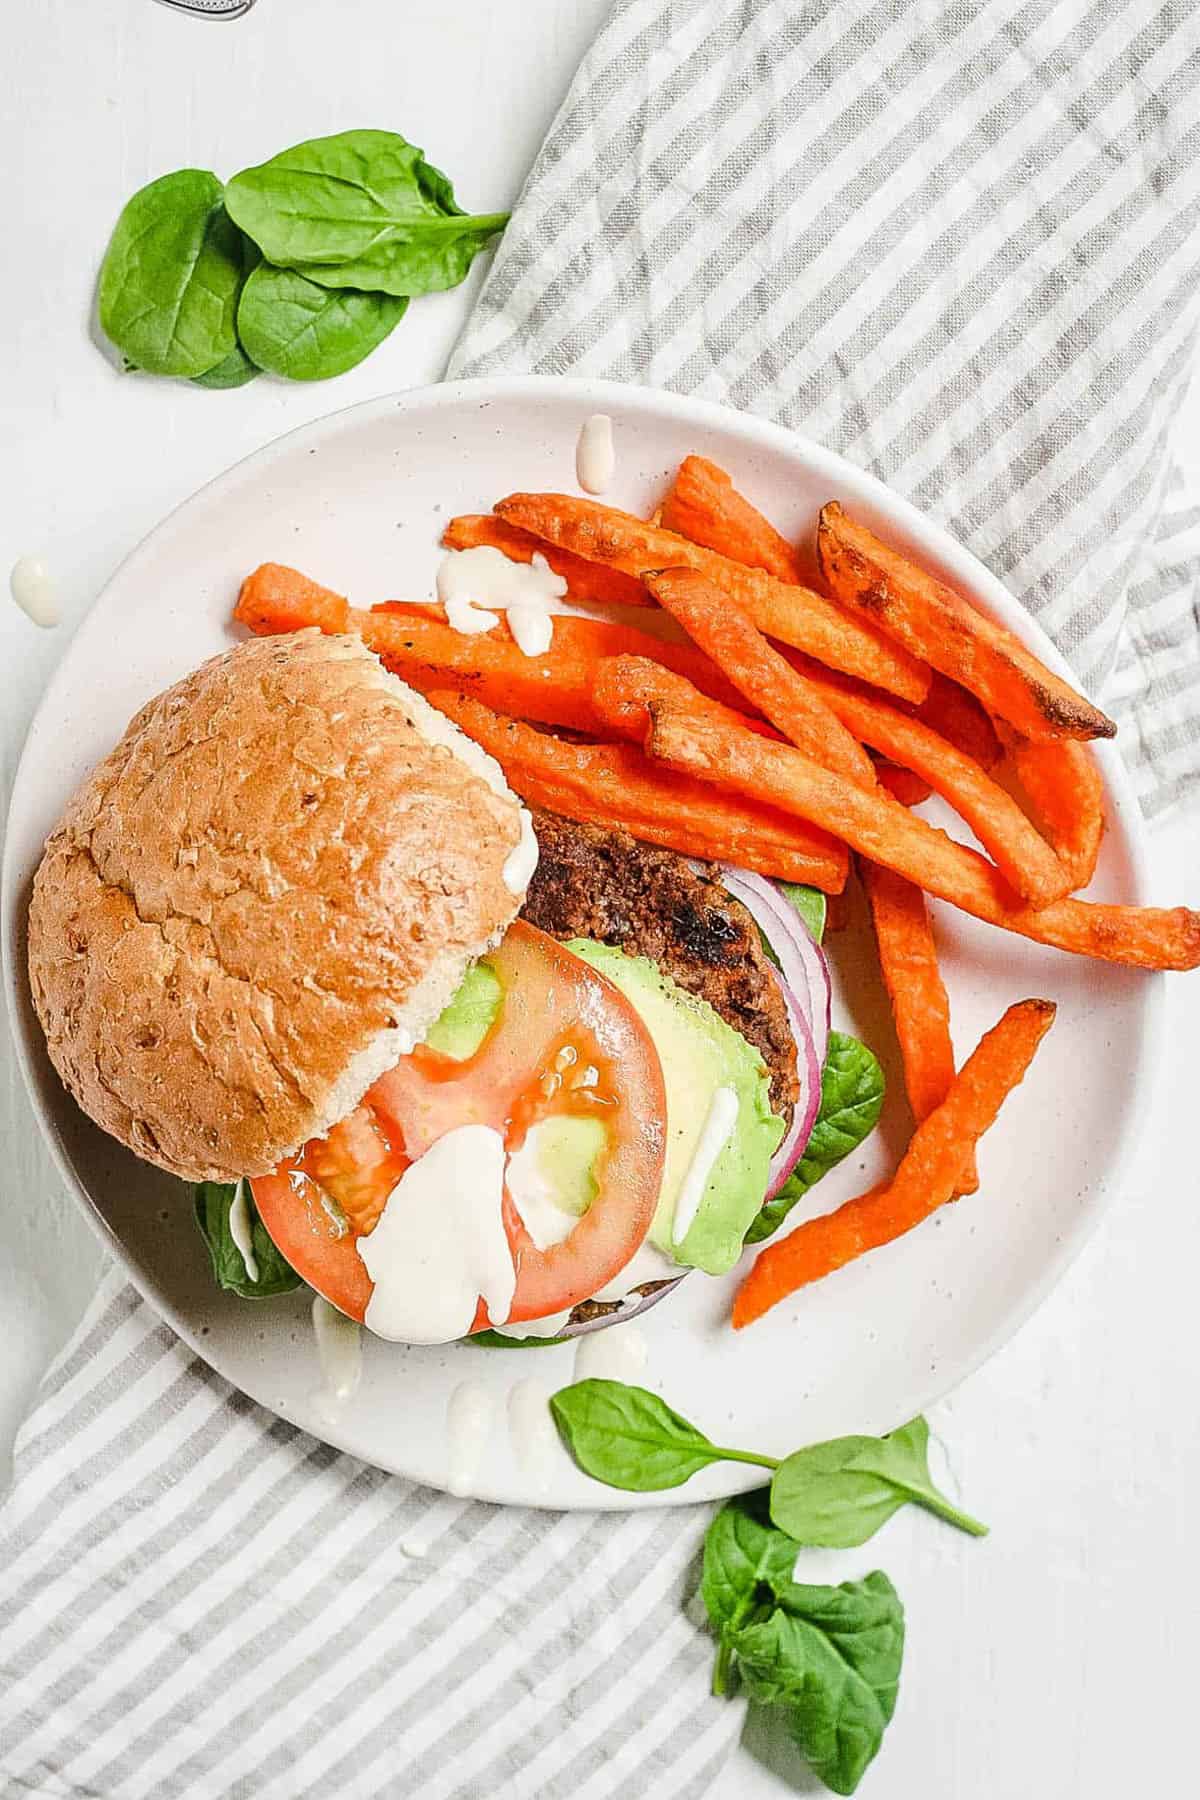 Spicy black bean burgers served on a white plate with fries on the side.